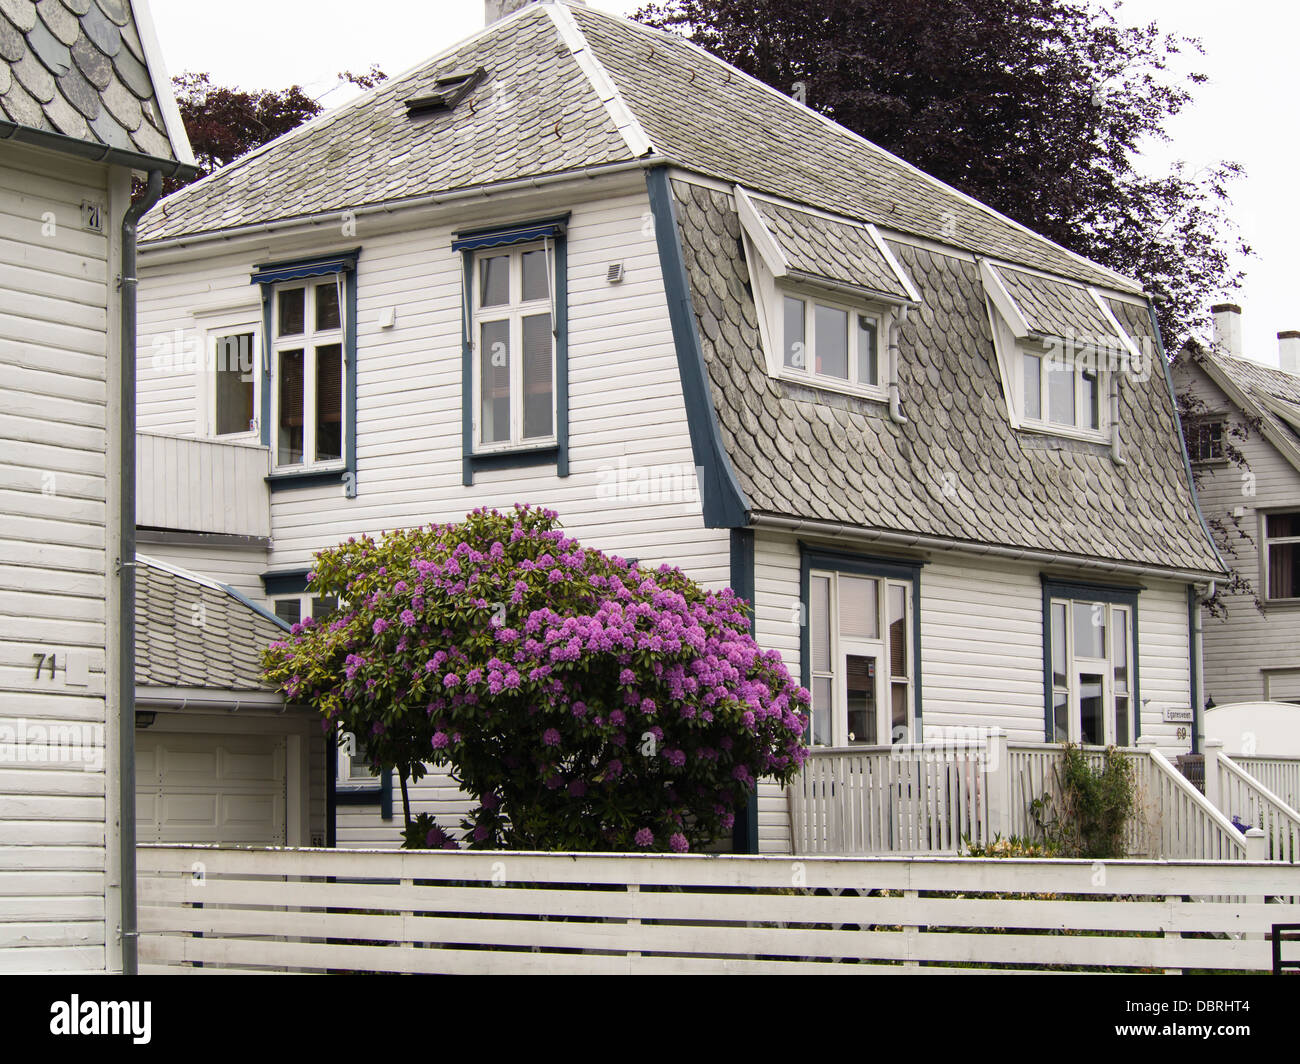 Residential area in Stavanger Norway, white wood paneled houses with gardens, large purple Rhododendron colouring the scene Stock Photo